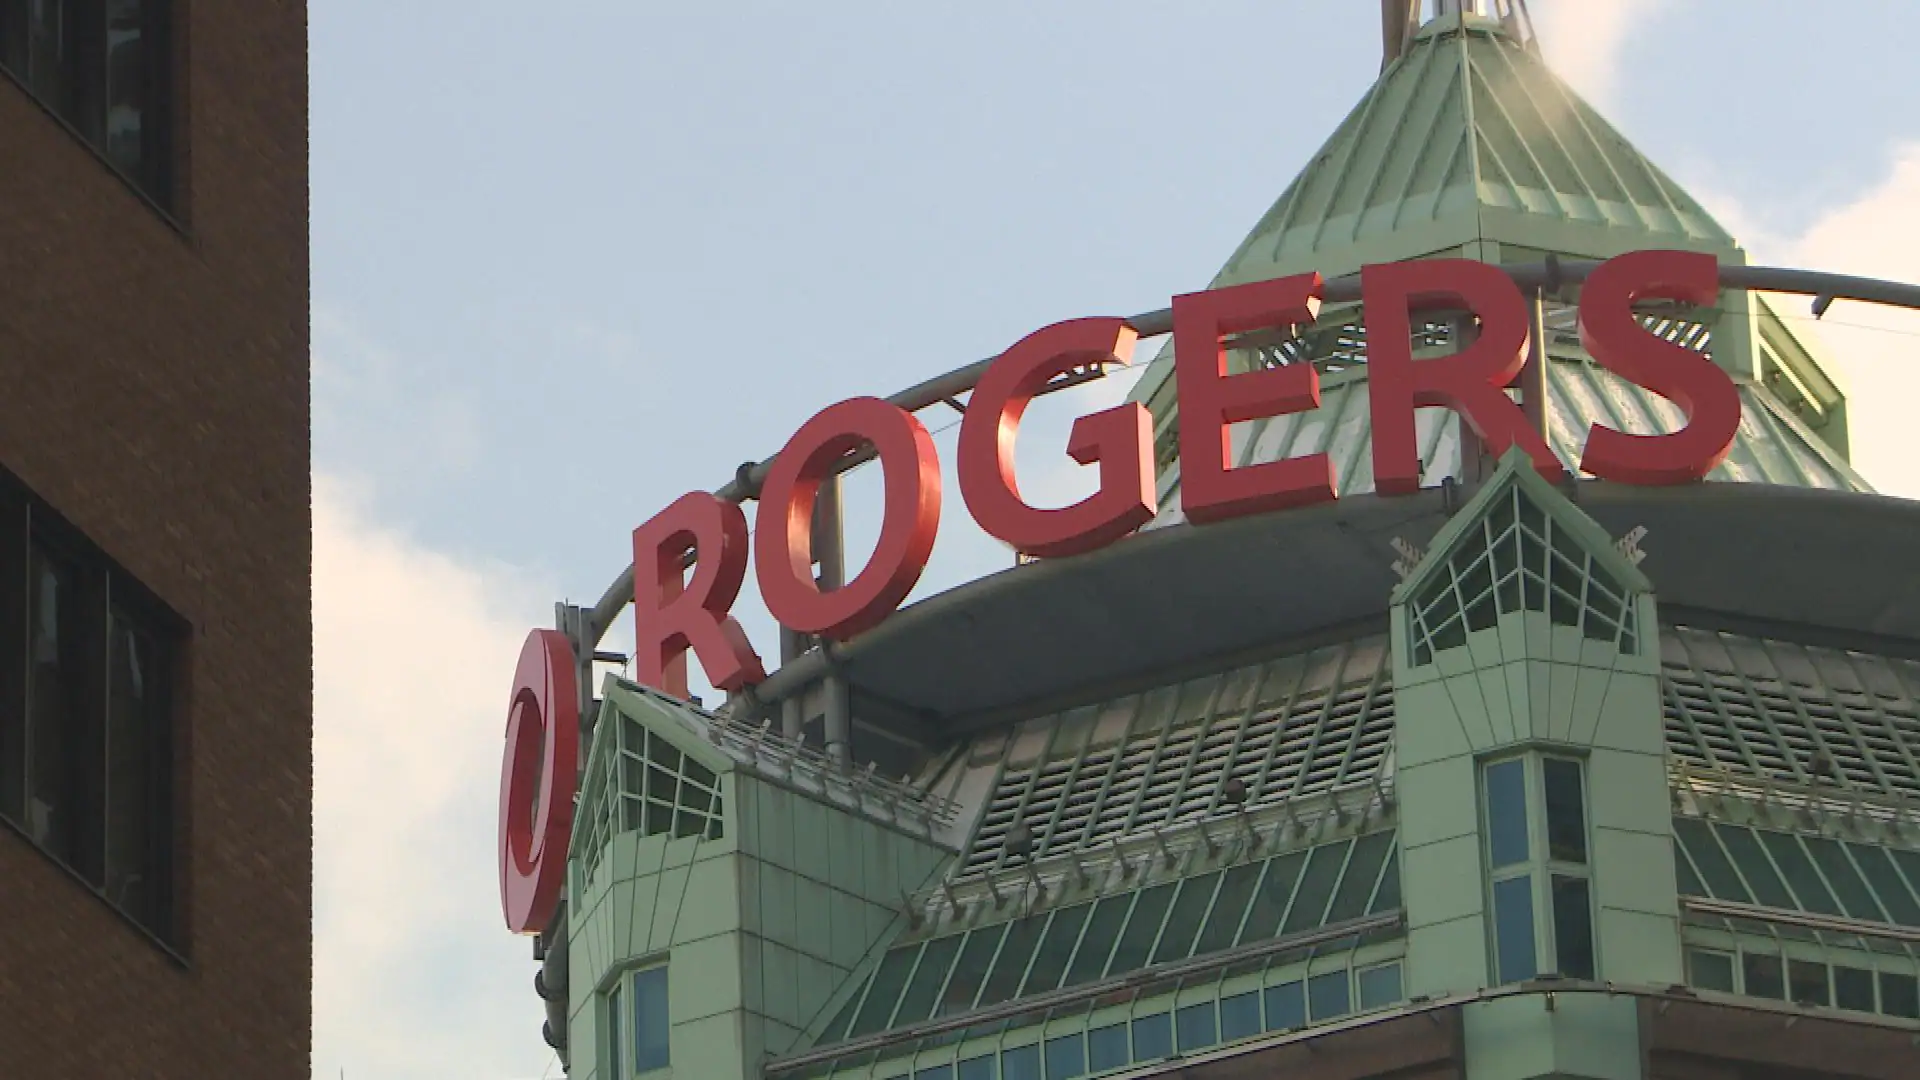 Cybersecurity analyst doesn't believe Rogers outage caused by malicious attack - CBC.ca